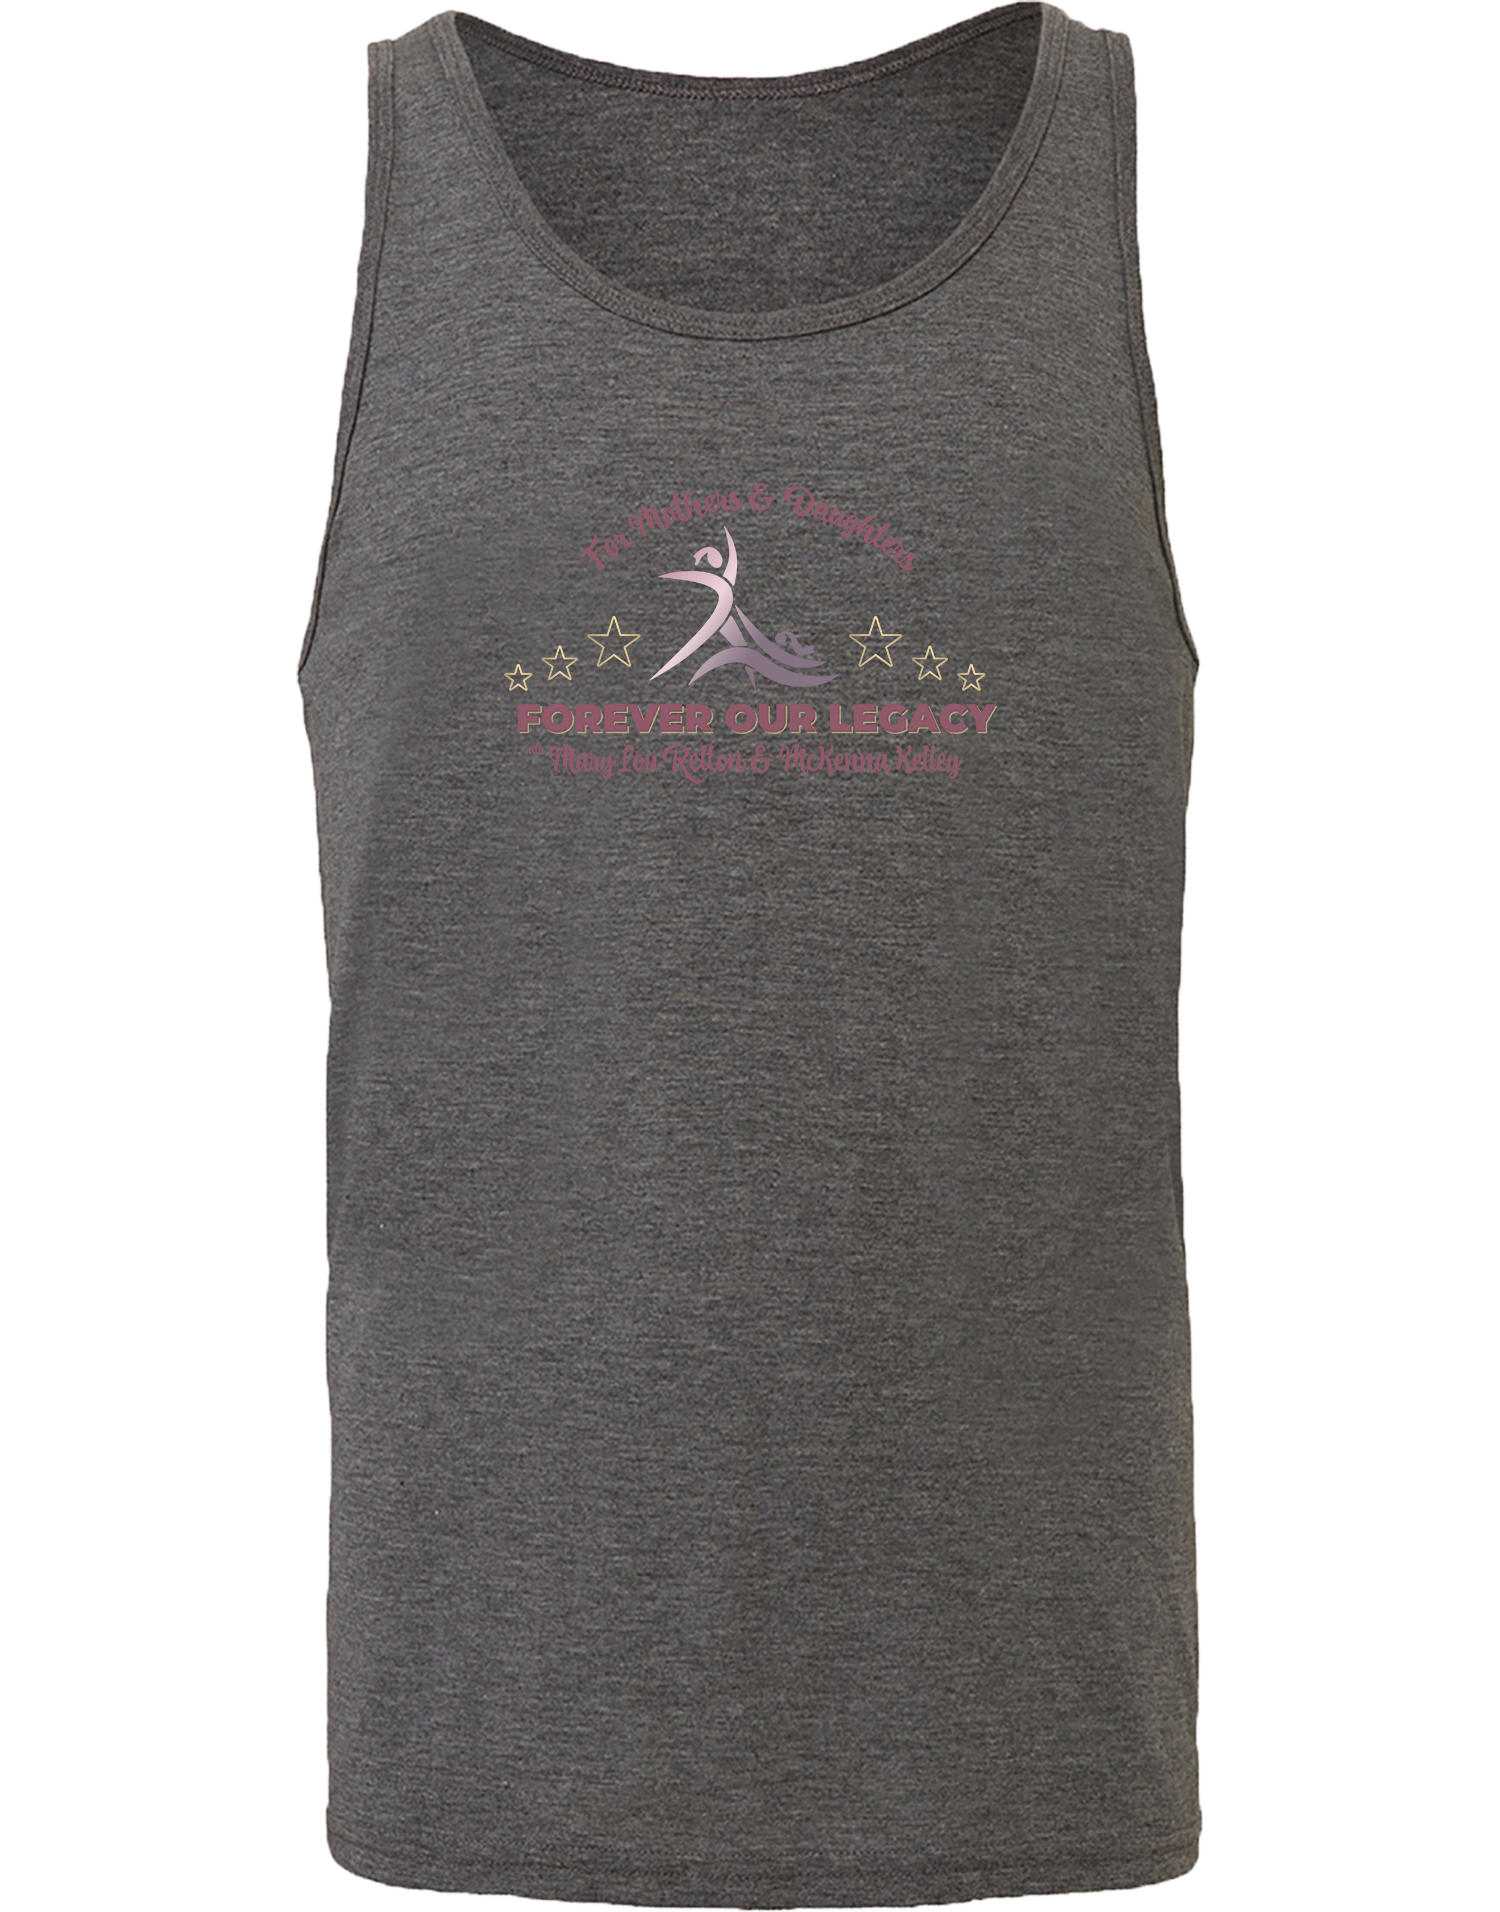 TANK TOP - 2023 For Mothers & Daughters Forever Our Legacy with Mary Lou Retton and Mckenna Kelley